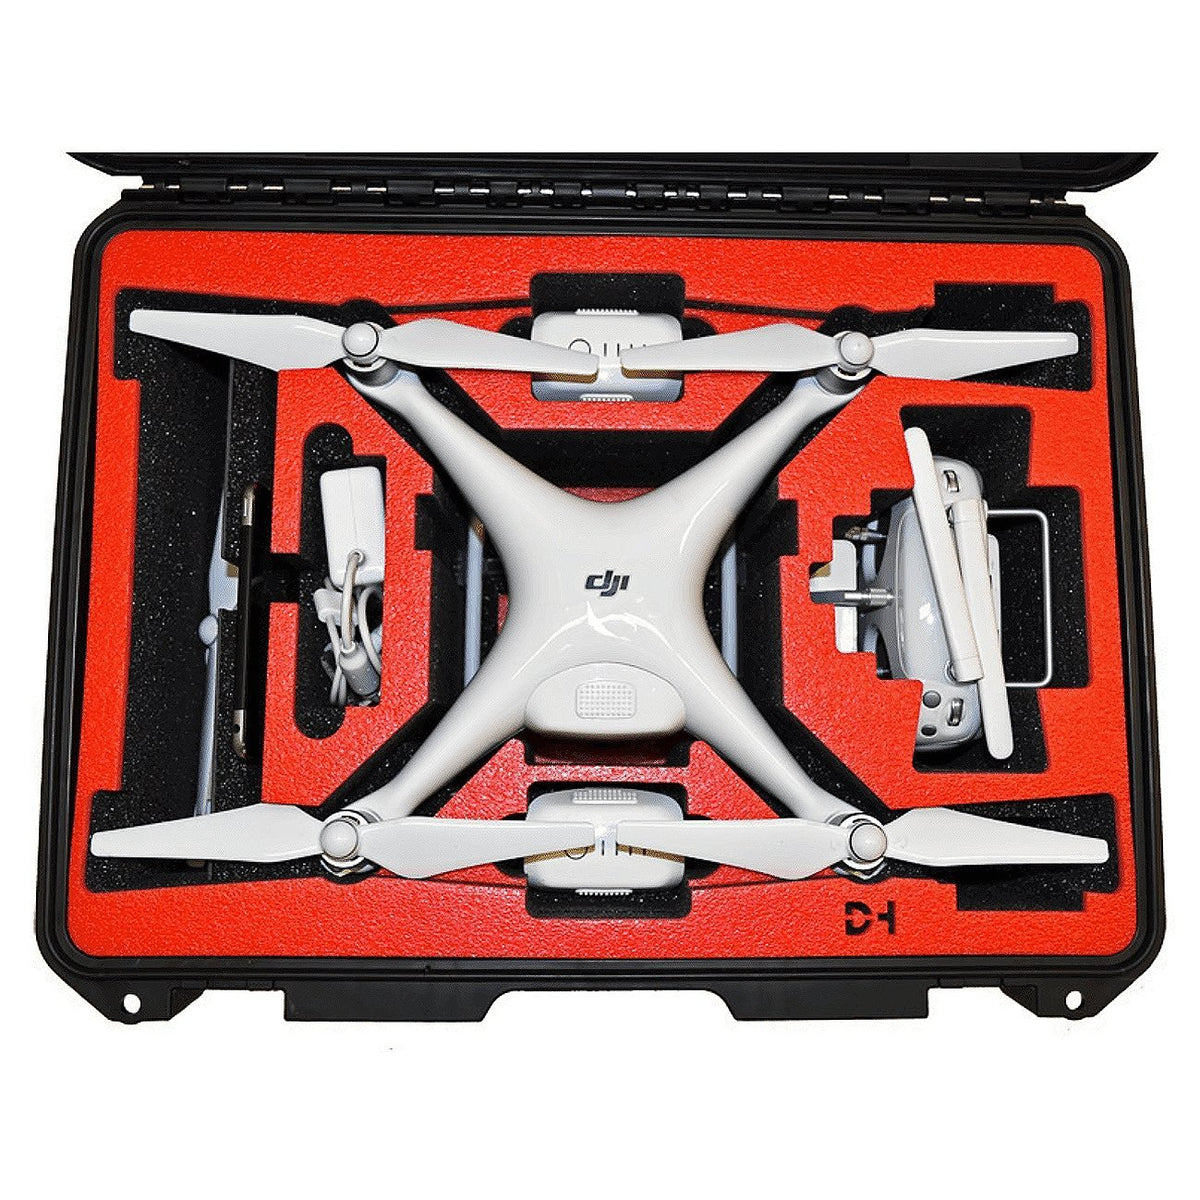 DJI Phantom 4 Case (with props installed)